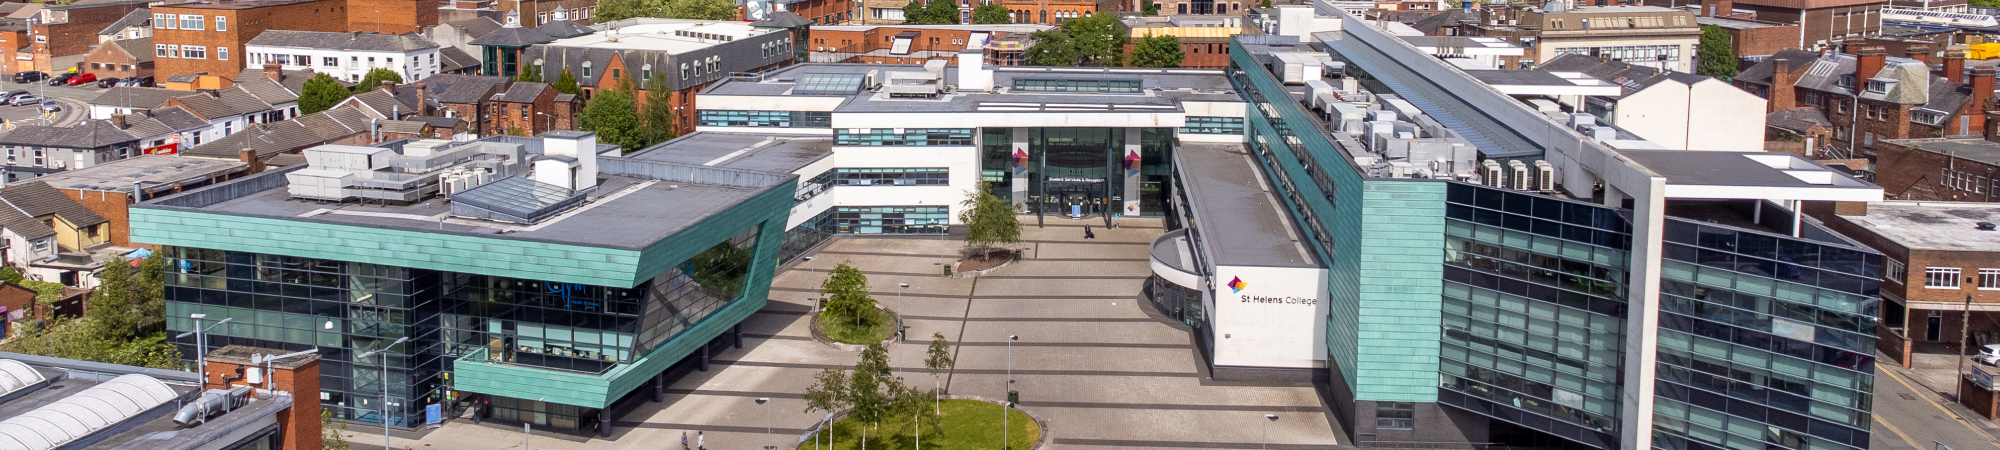 Drone shot showing off the St Helens Town Centre Campus